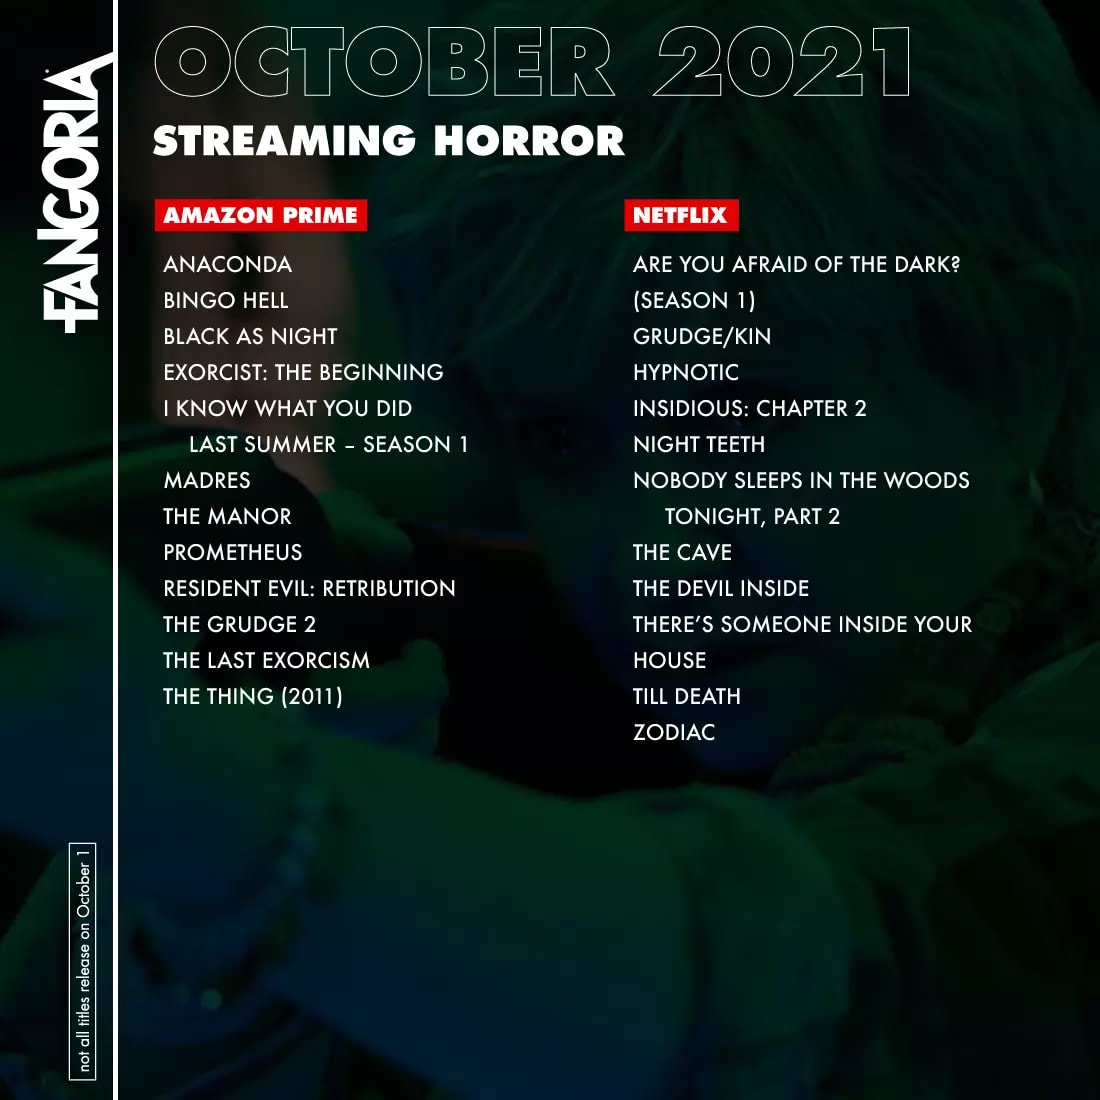 Here is a list of all the horror movies being added to streaming services in October